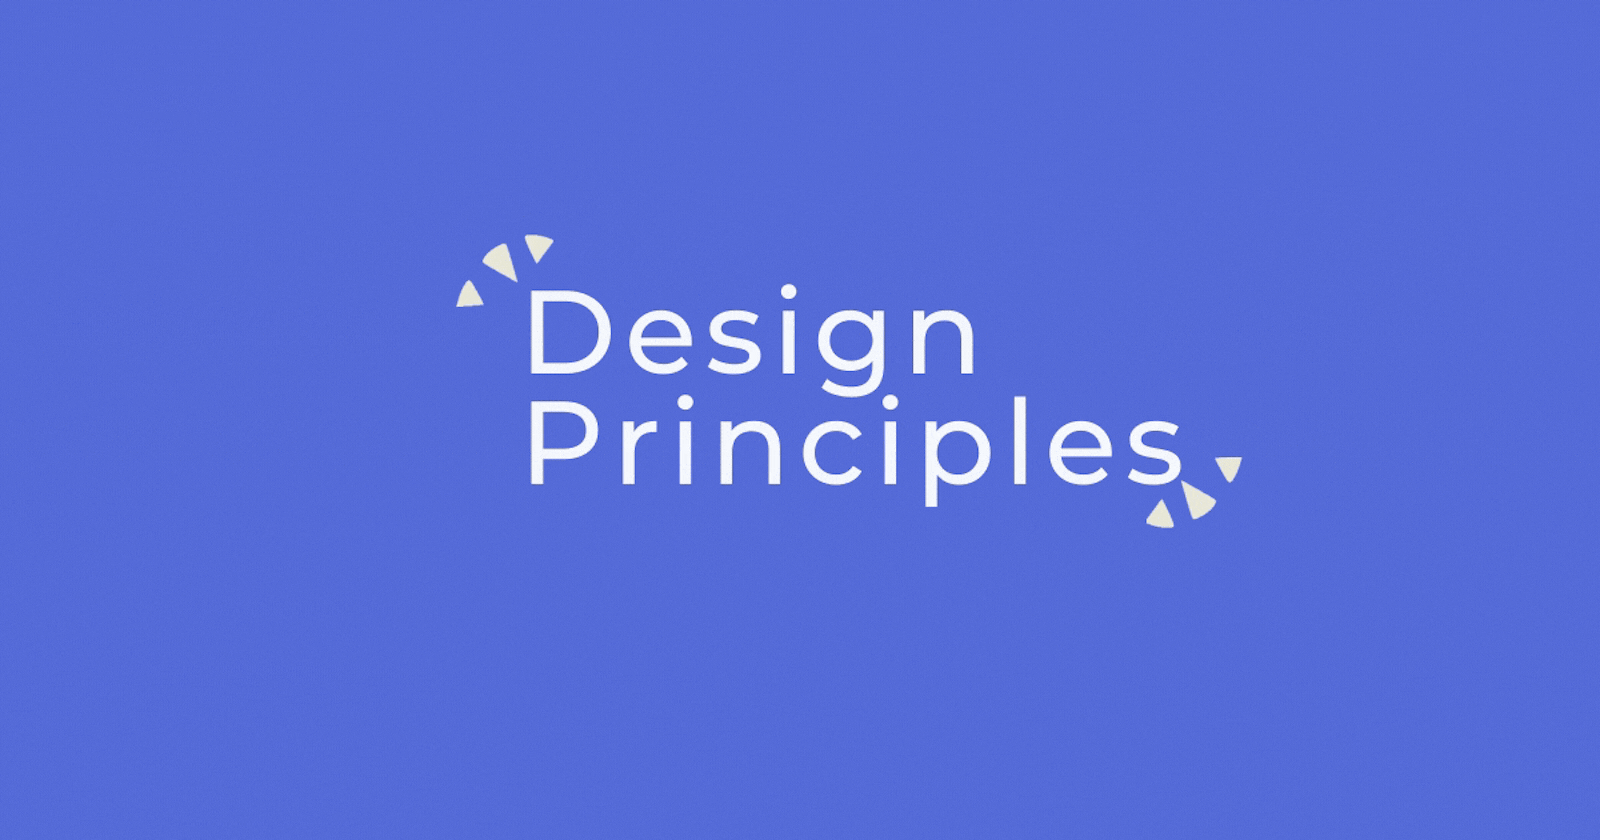 Design Principles in Practice: Explained Using an Actual Example.